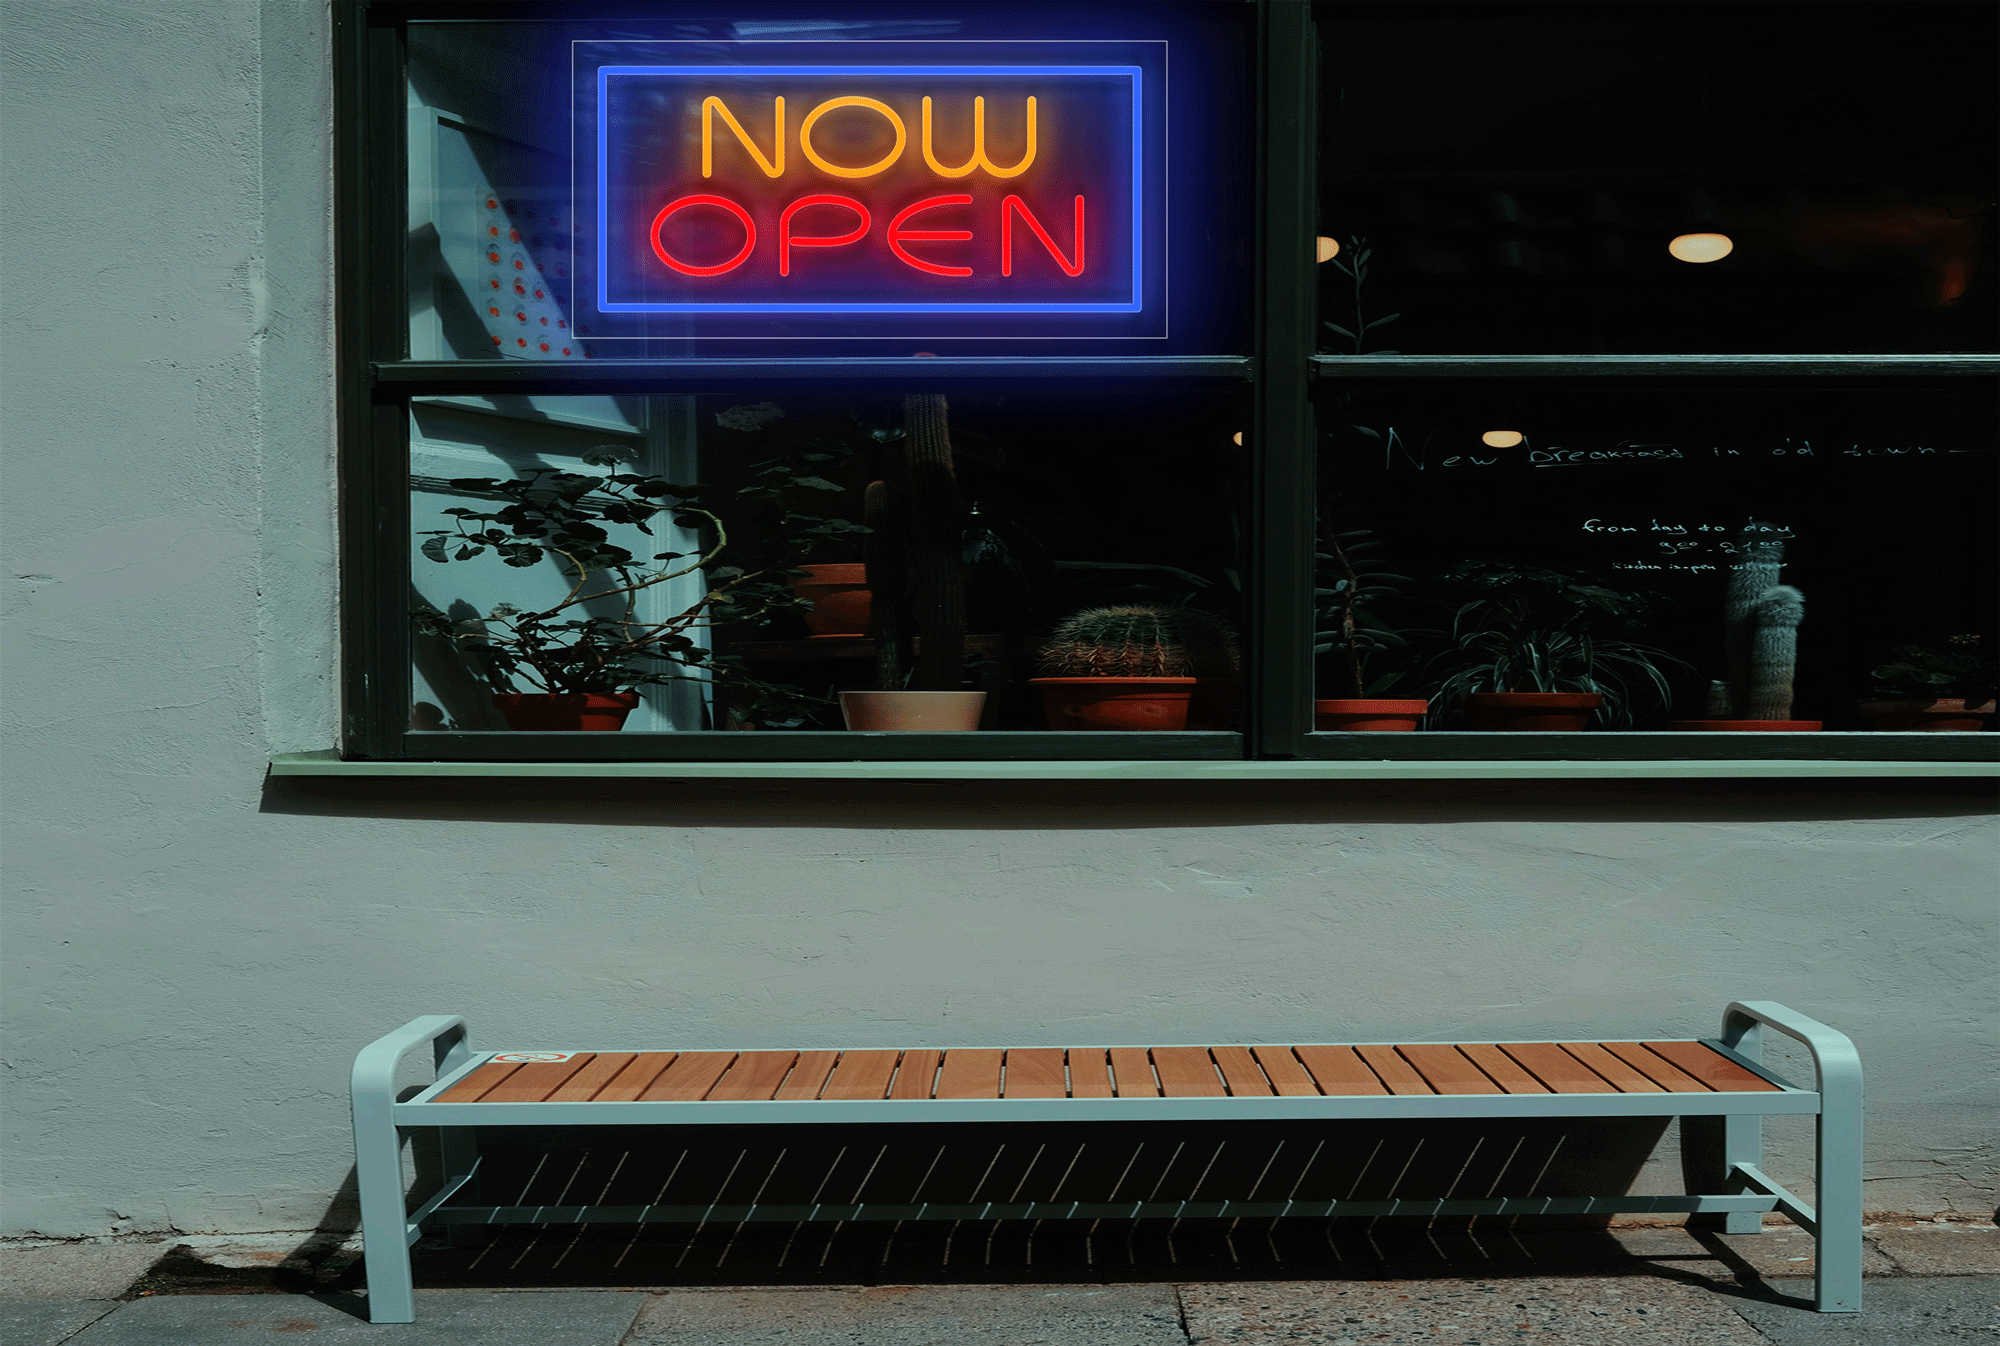 NOW OPEN with Blue Border LED Neon Sign